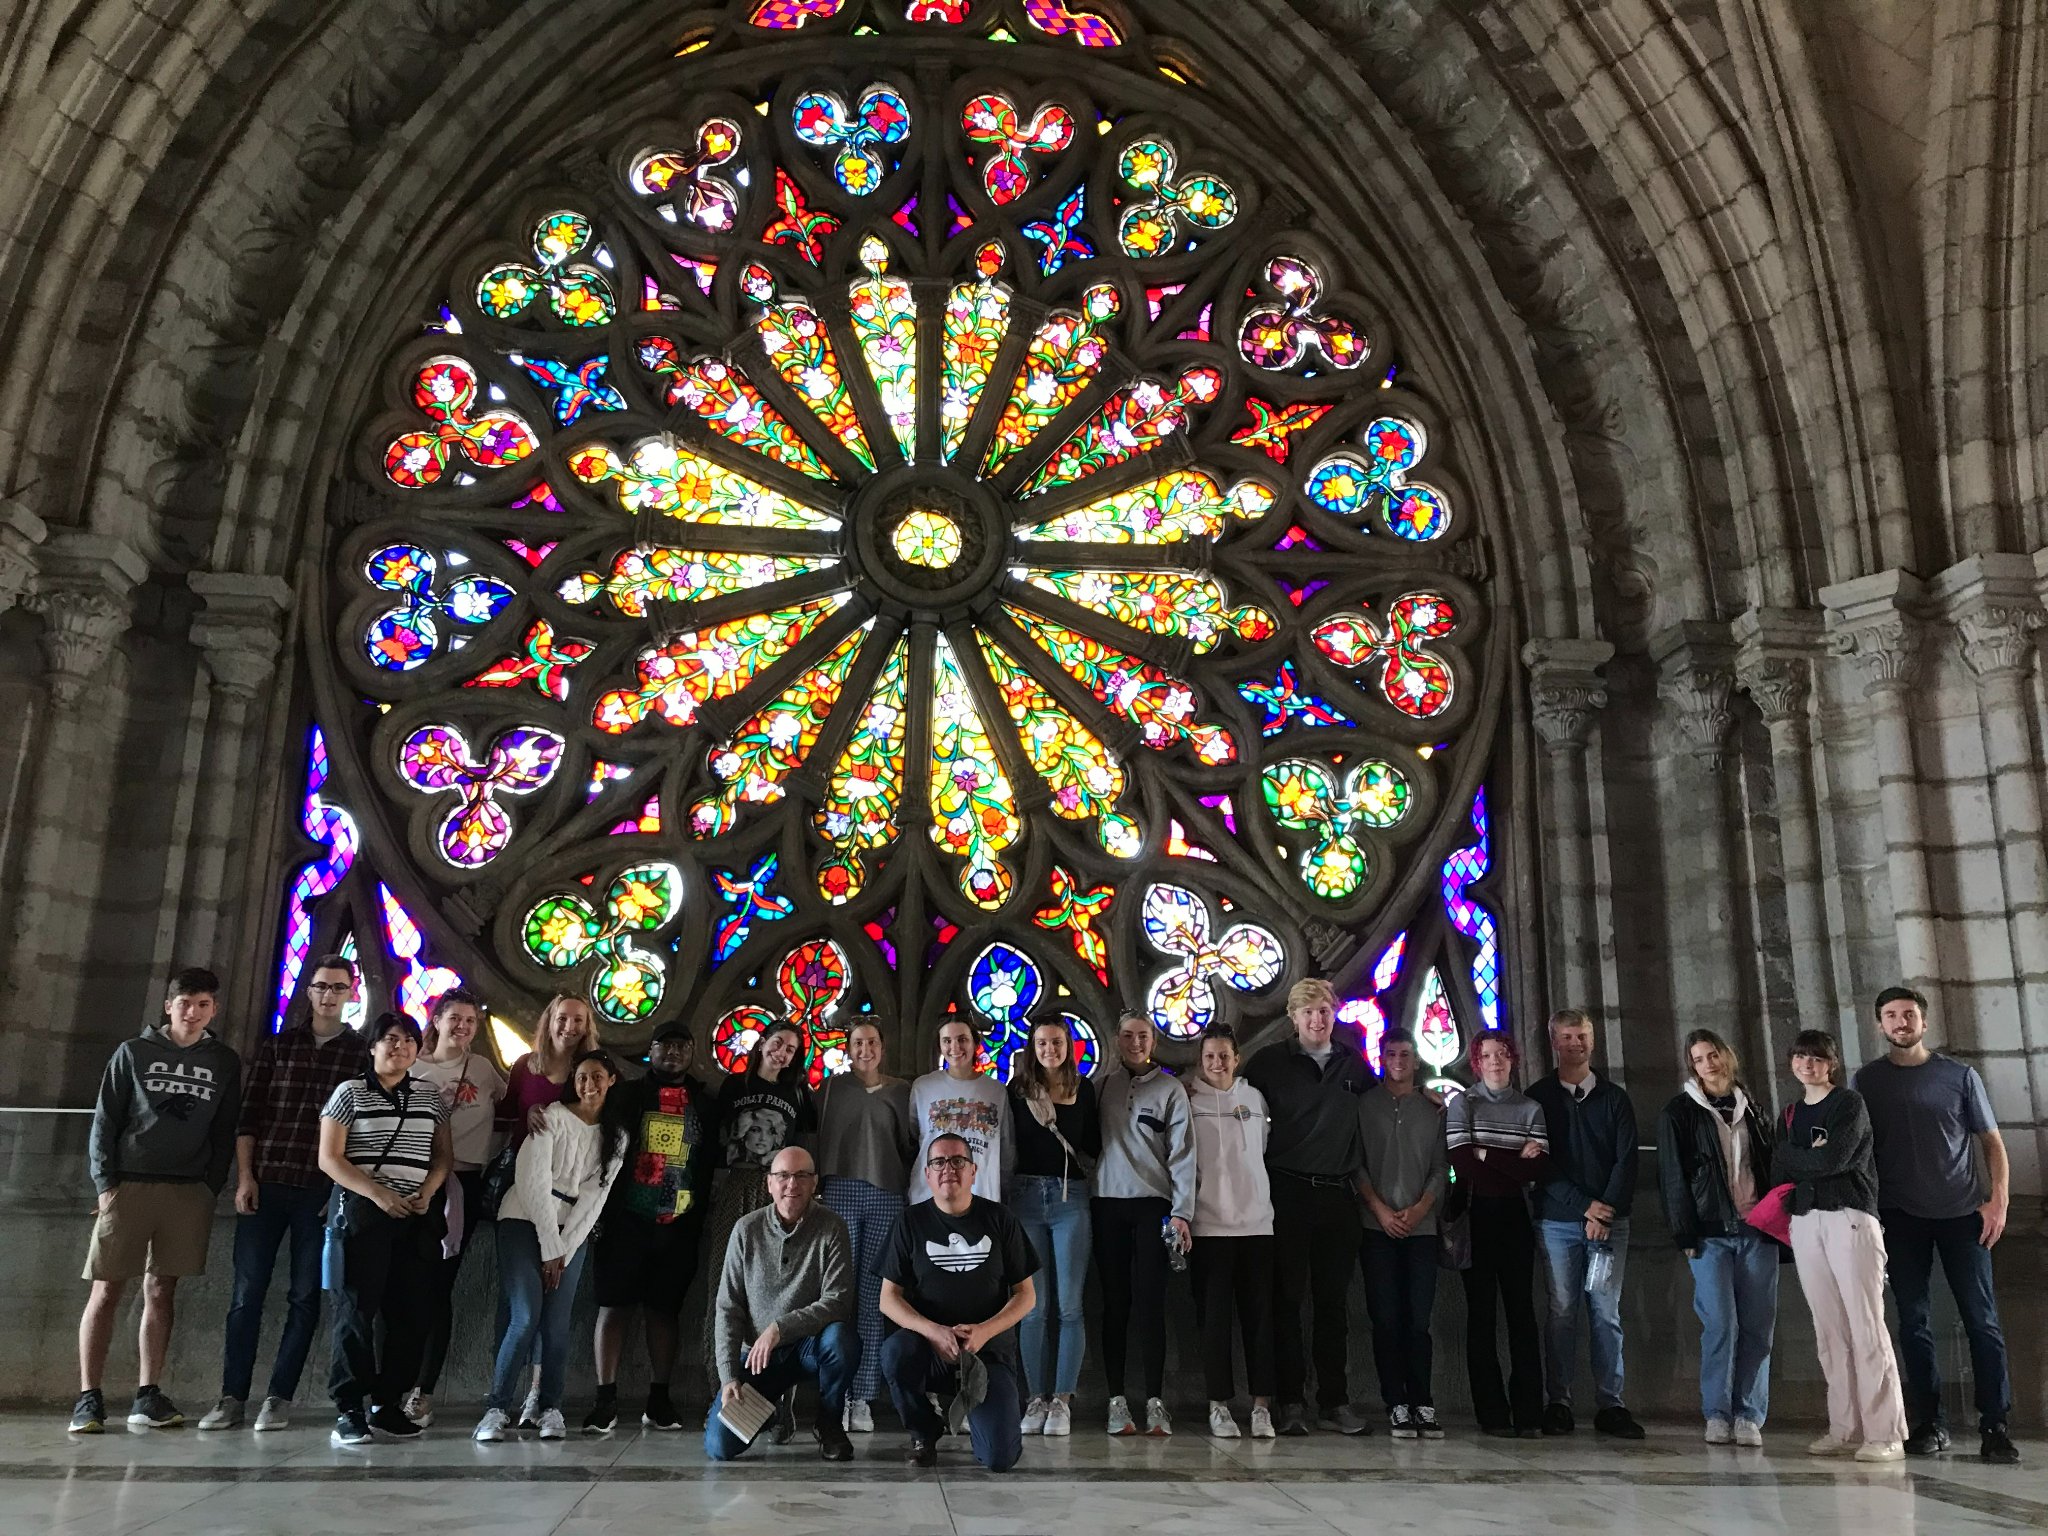 Rhodes College students and faculty standing in front of stained glass window of the Basílica del Voto Nacional